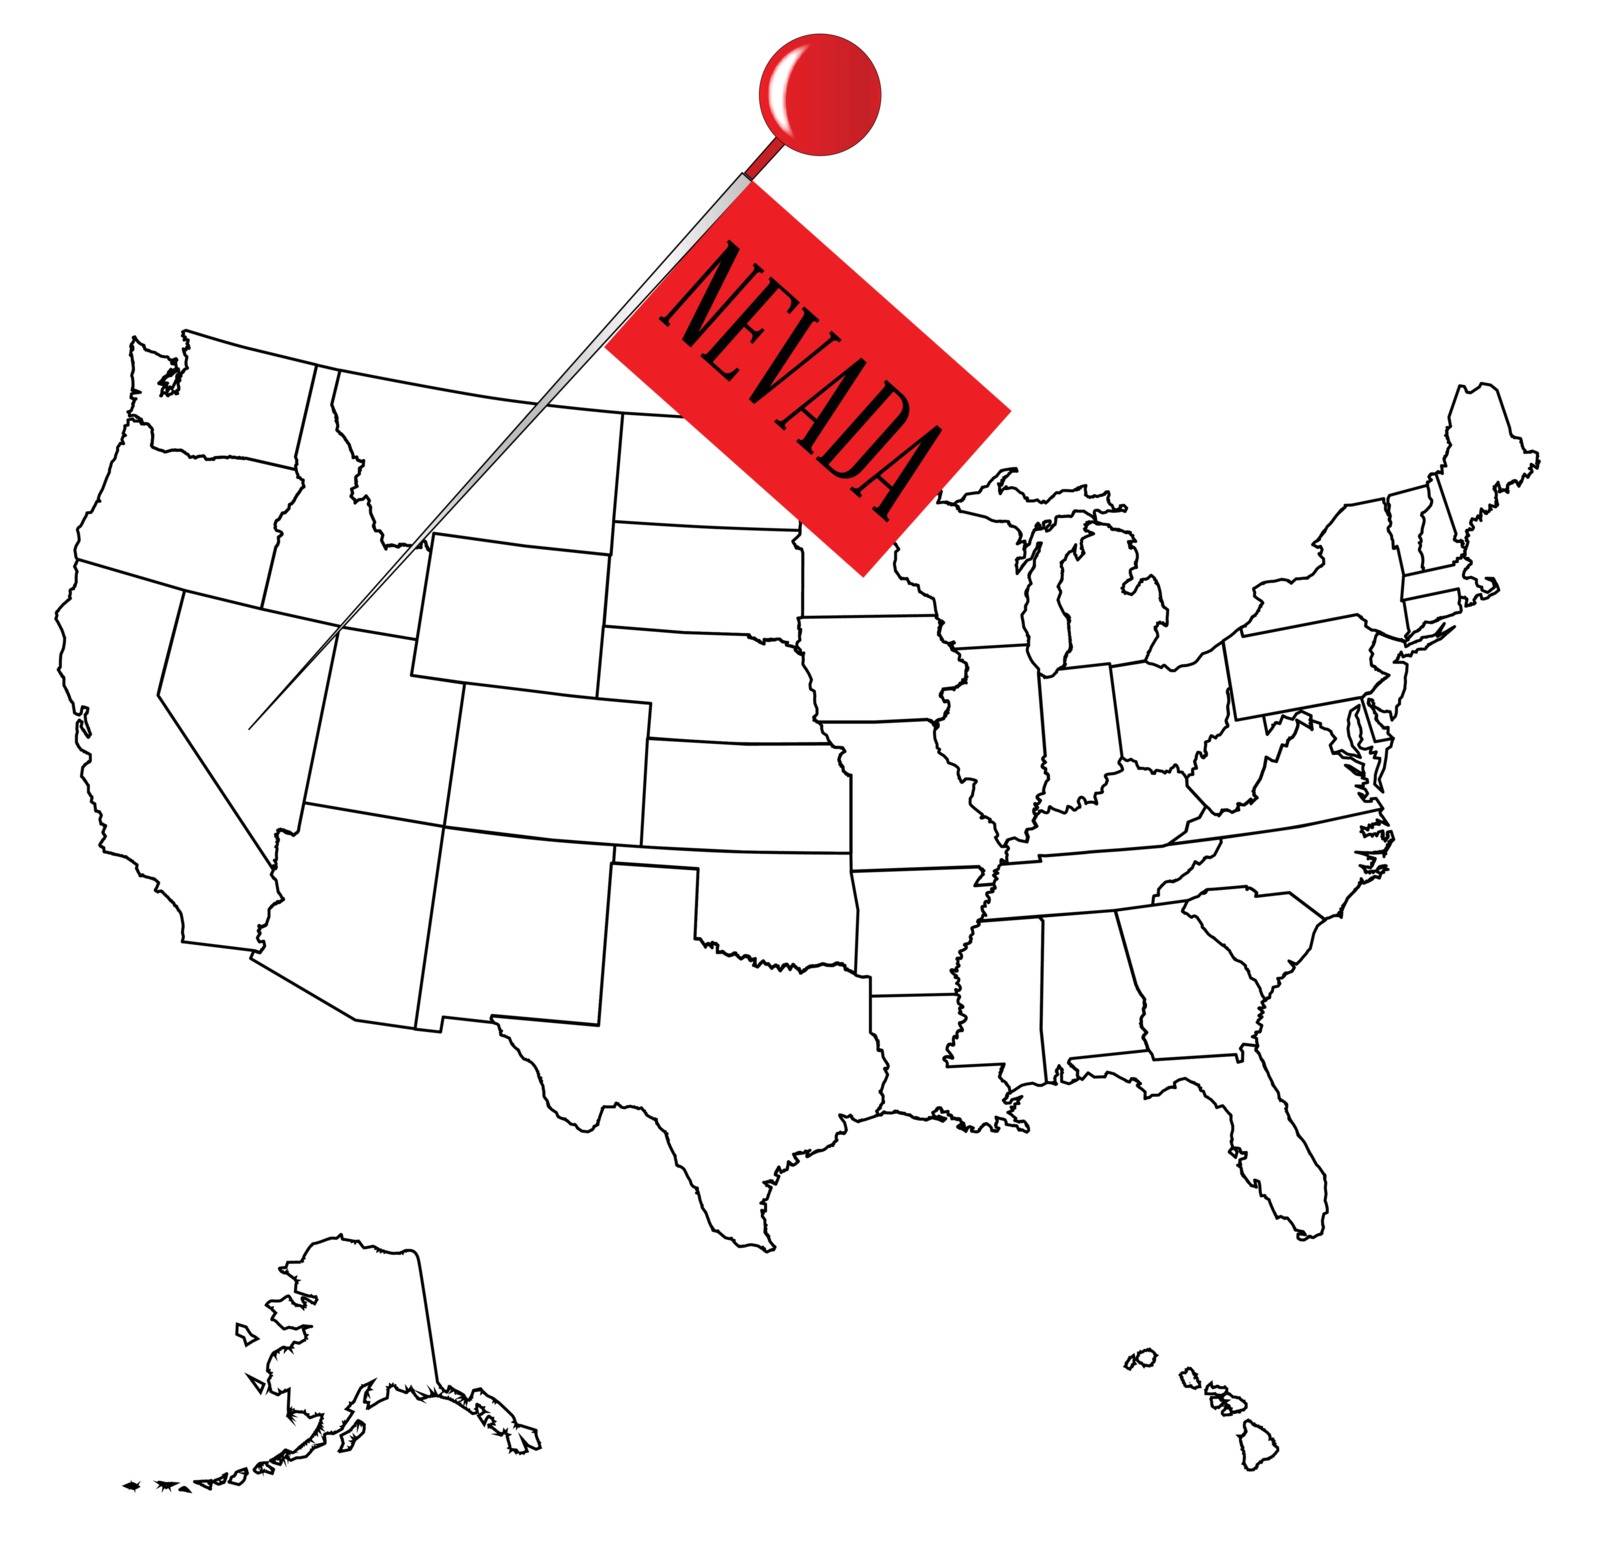 An outline map of USA with a knob pin in the state of Nevada